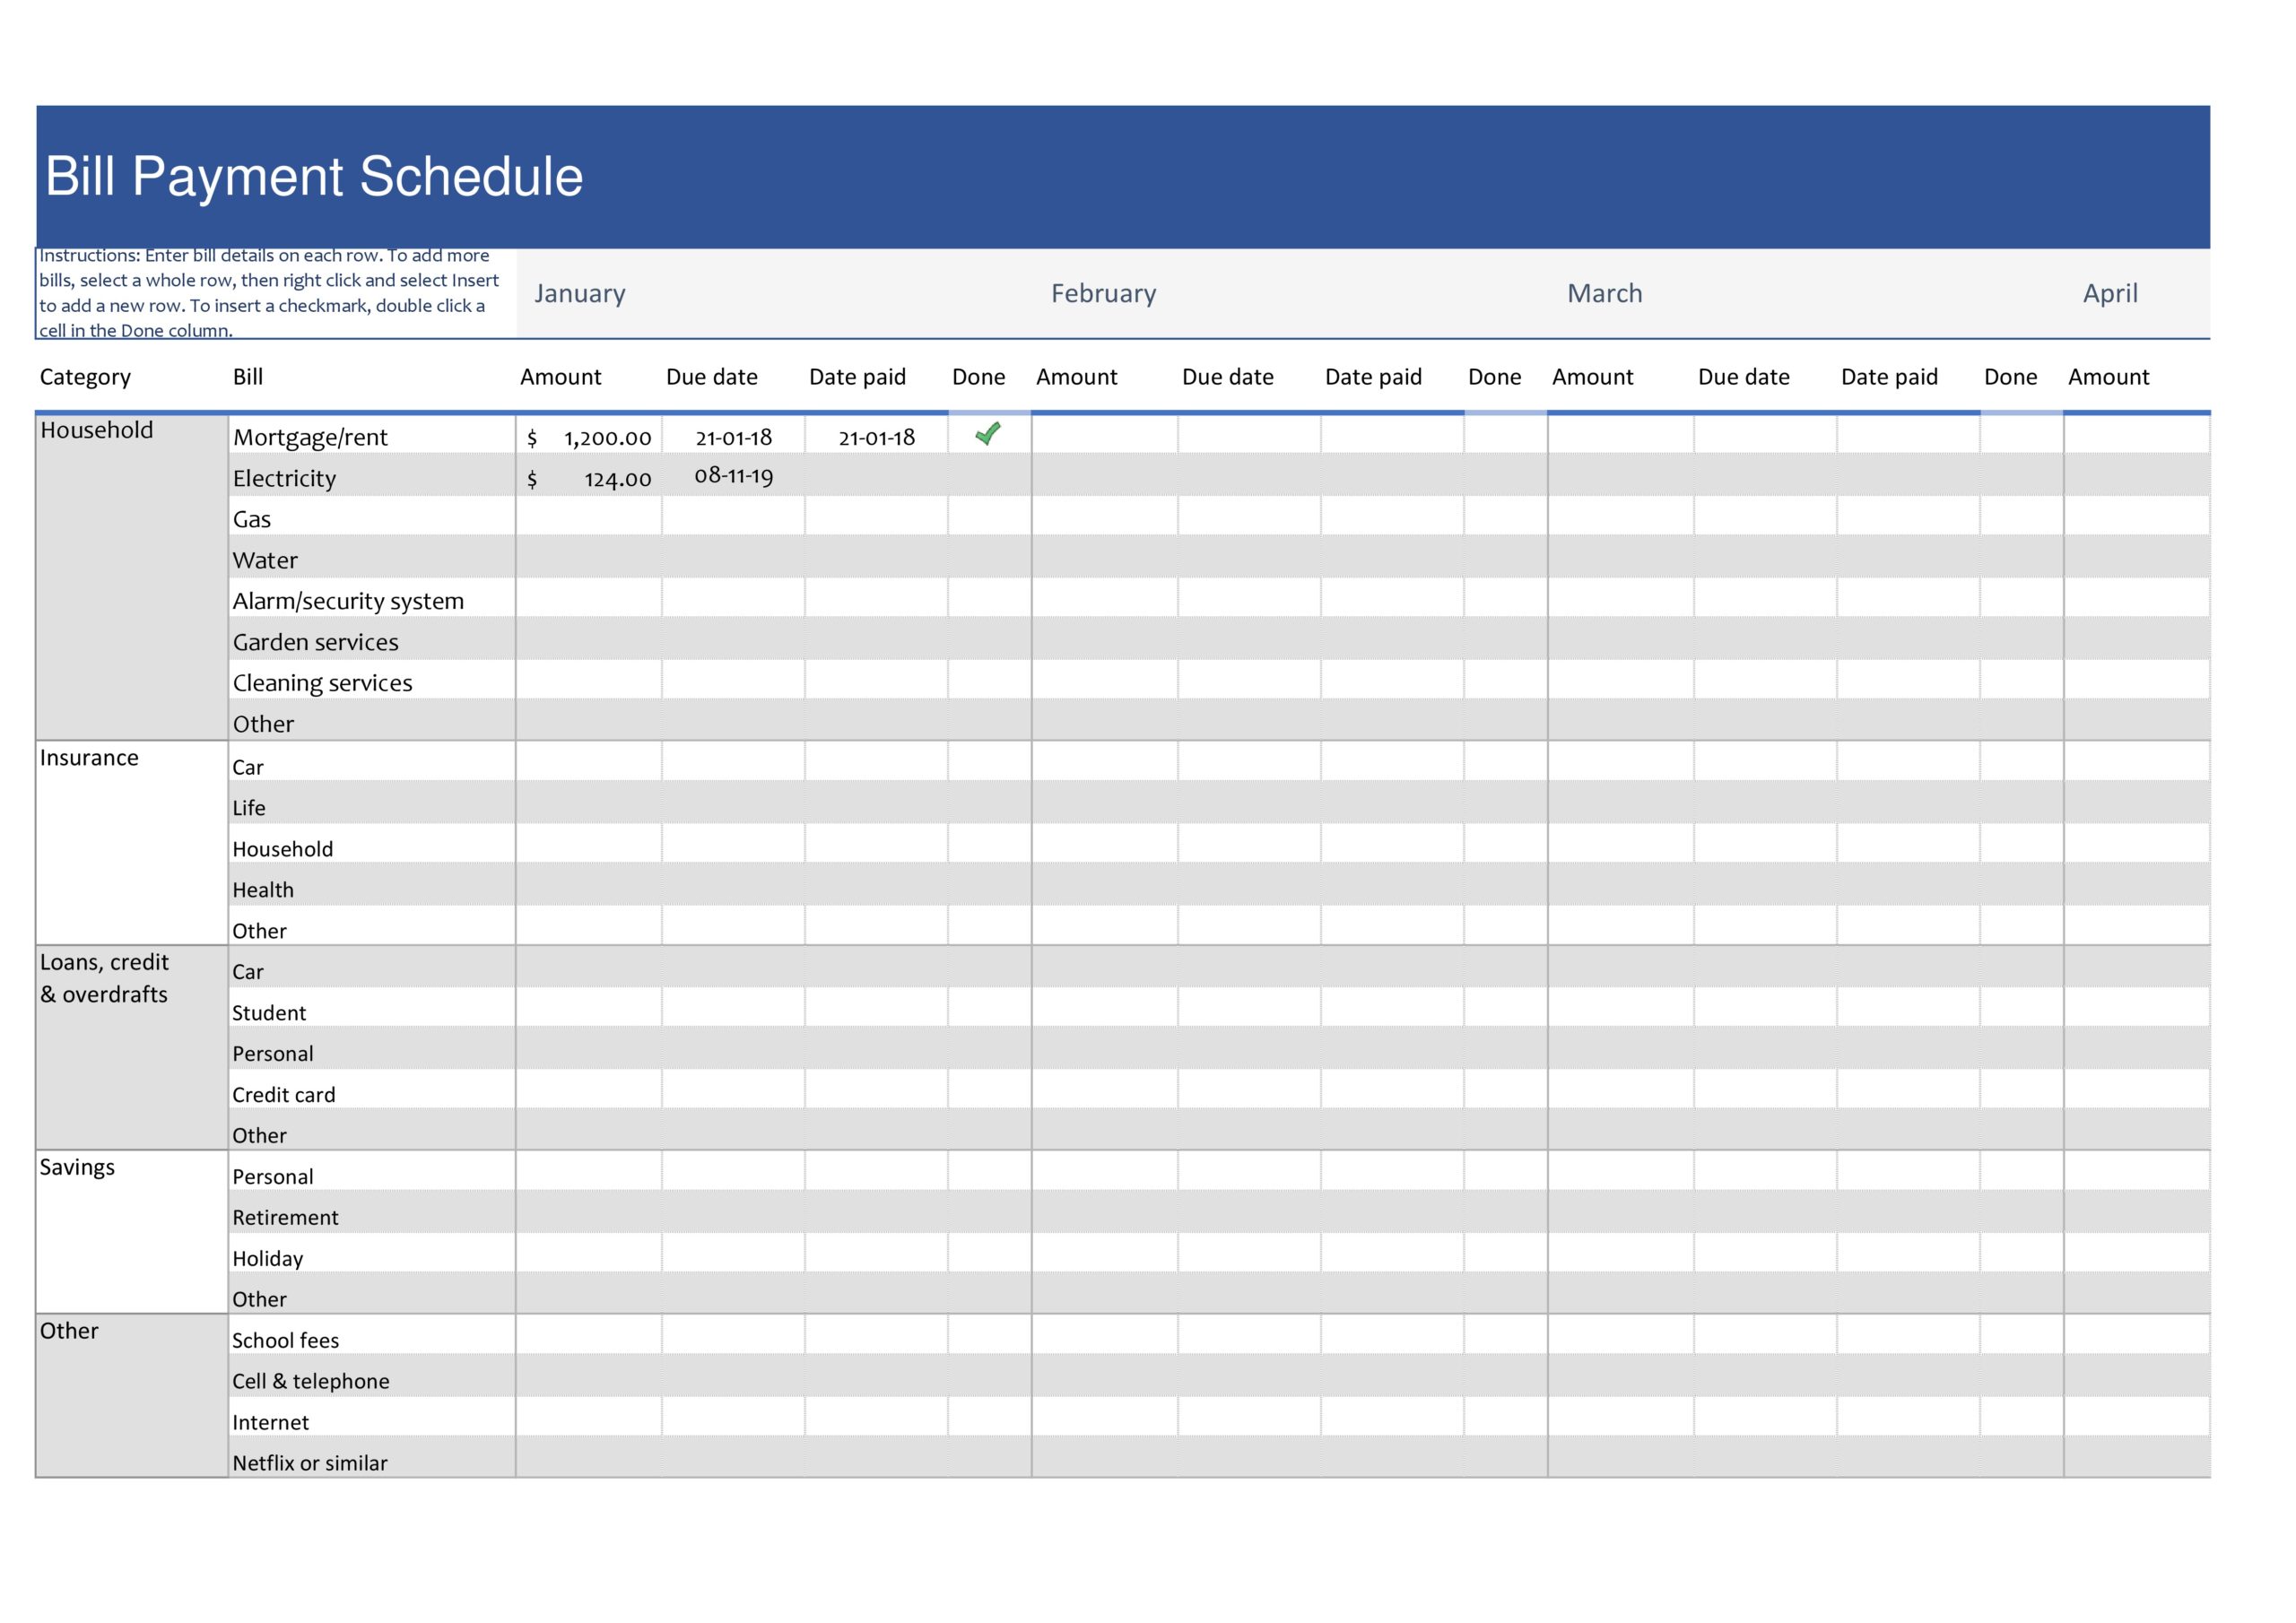 49 Free Payment Schedule Templates Excel Word ᐅ TemplateLab